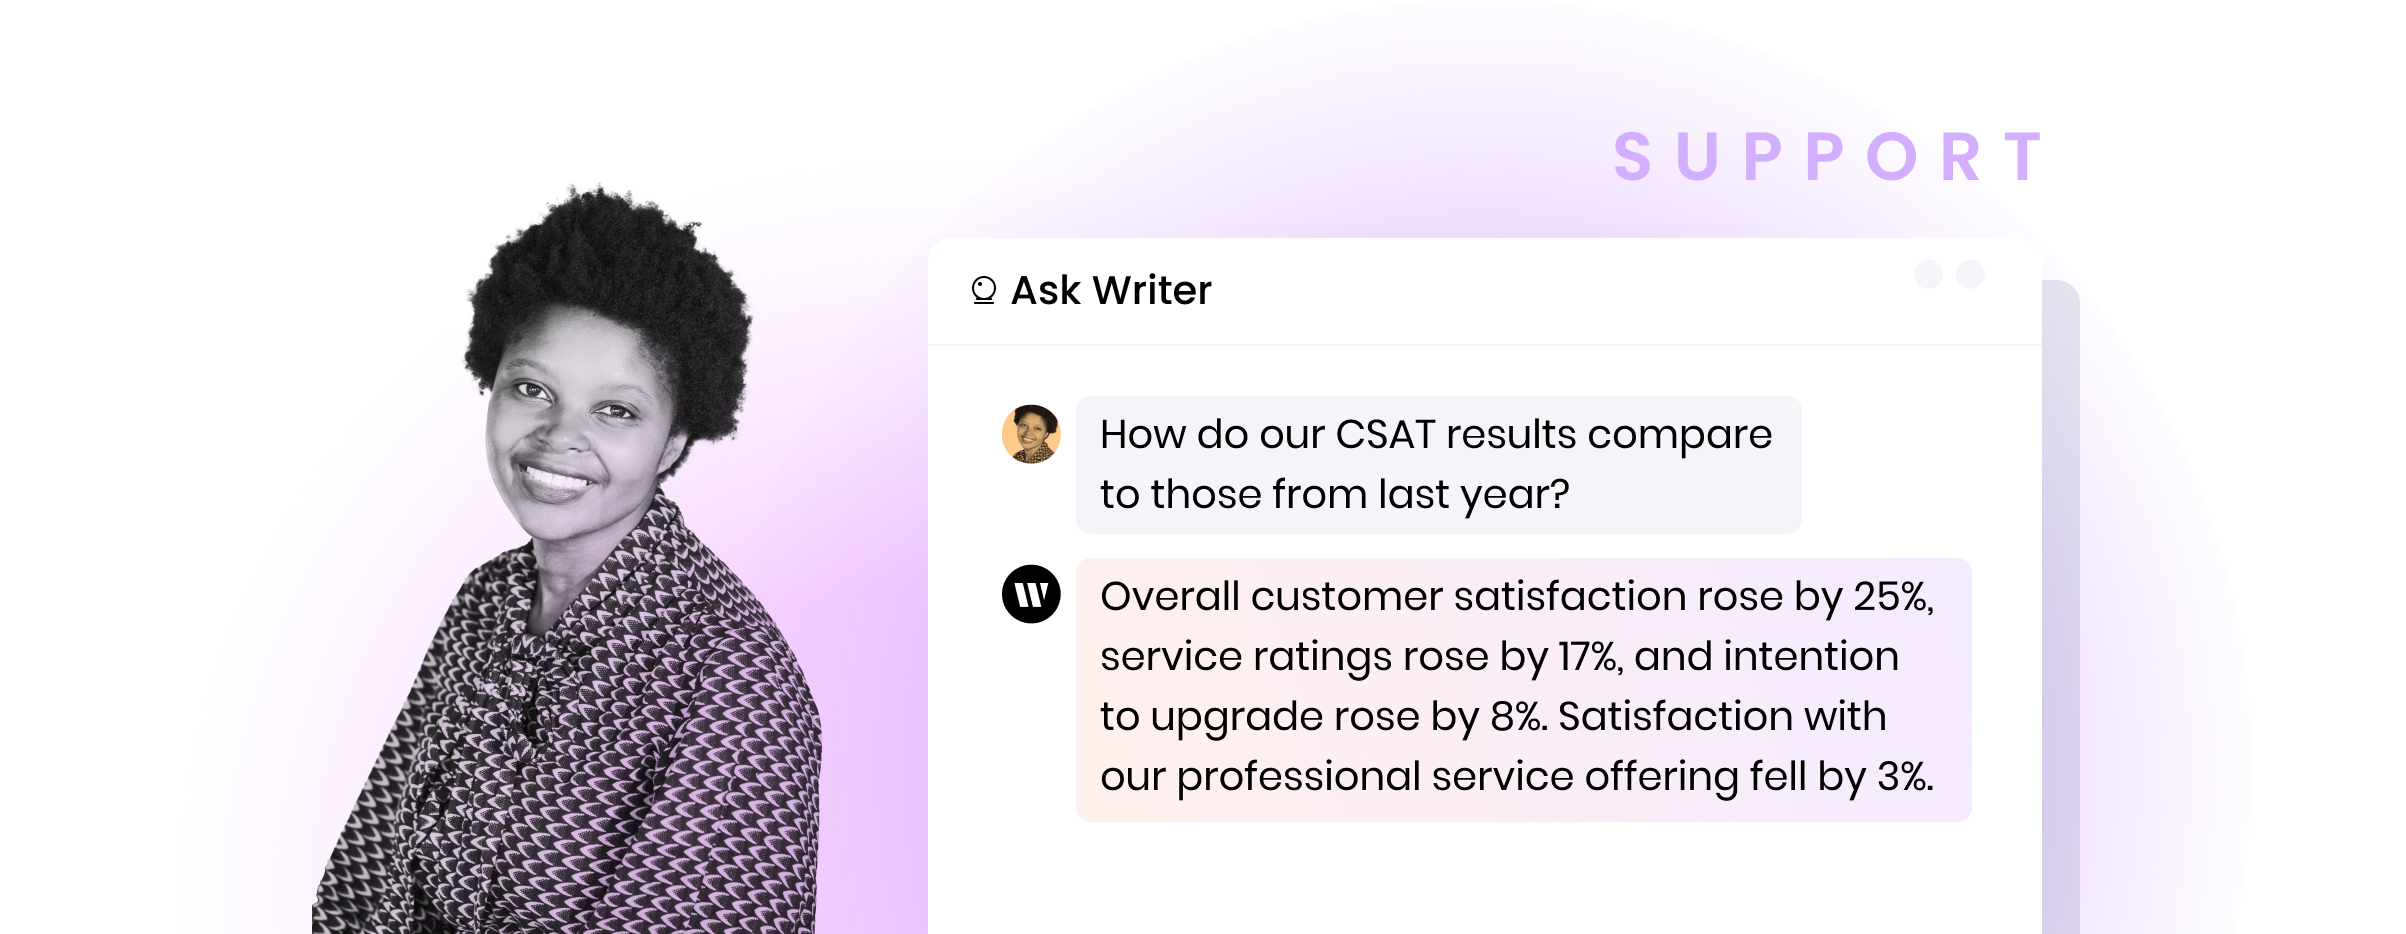 Support person using Ask Writer. Question: How do our CSAT results compare to those from last year? Response: Overall customer satisfaction rose by 25%, service ratings rose by 17%, and intention to upgrade rose by 8%. Satisfaction with our professional service offering fell by 3%.